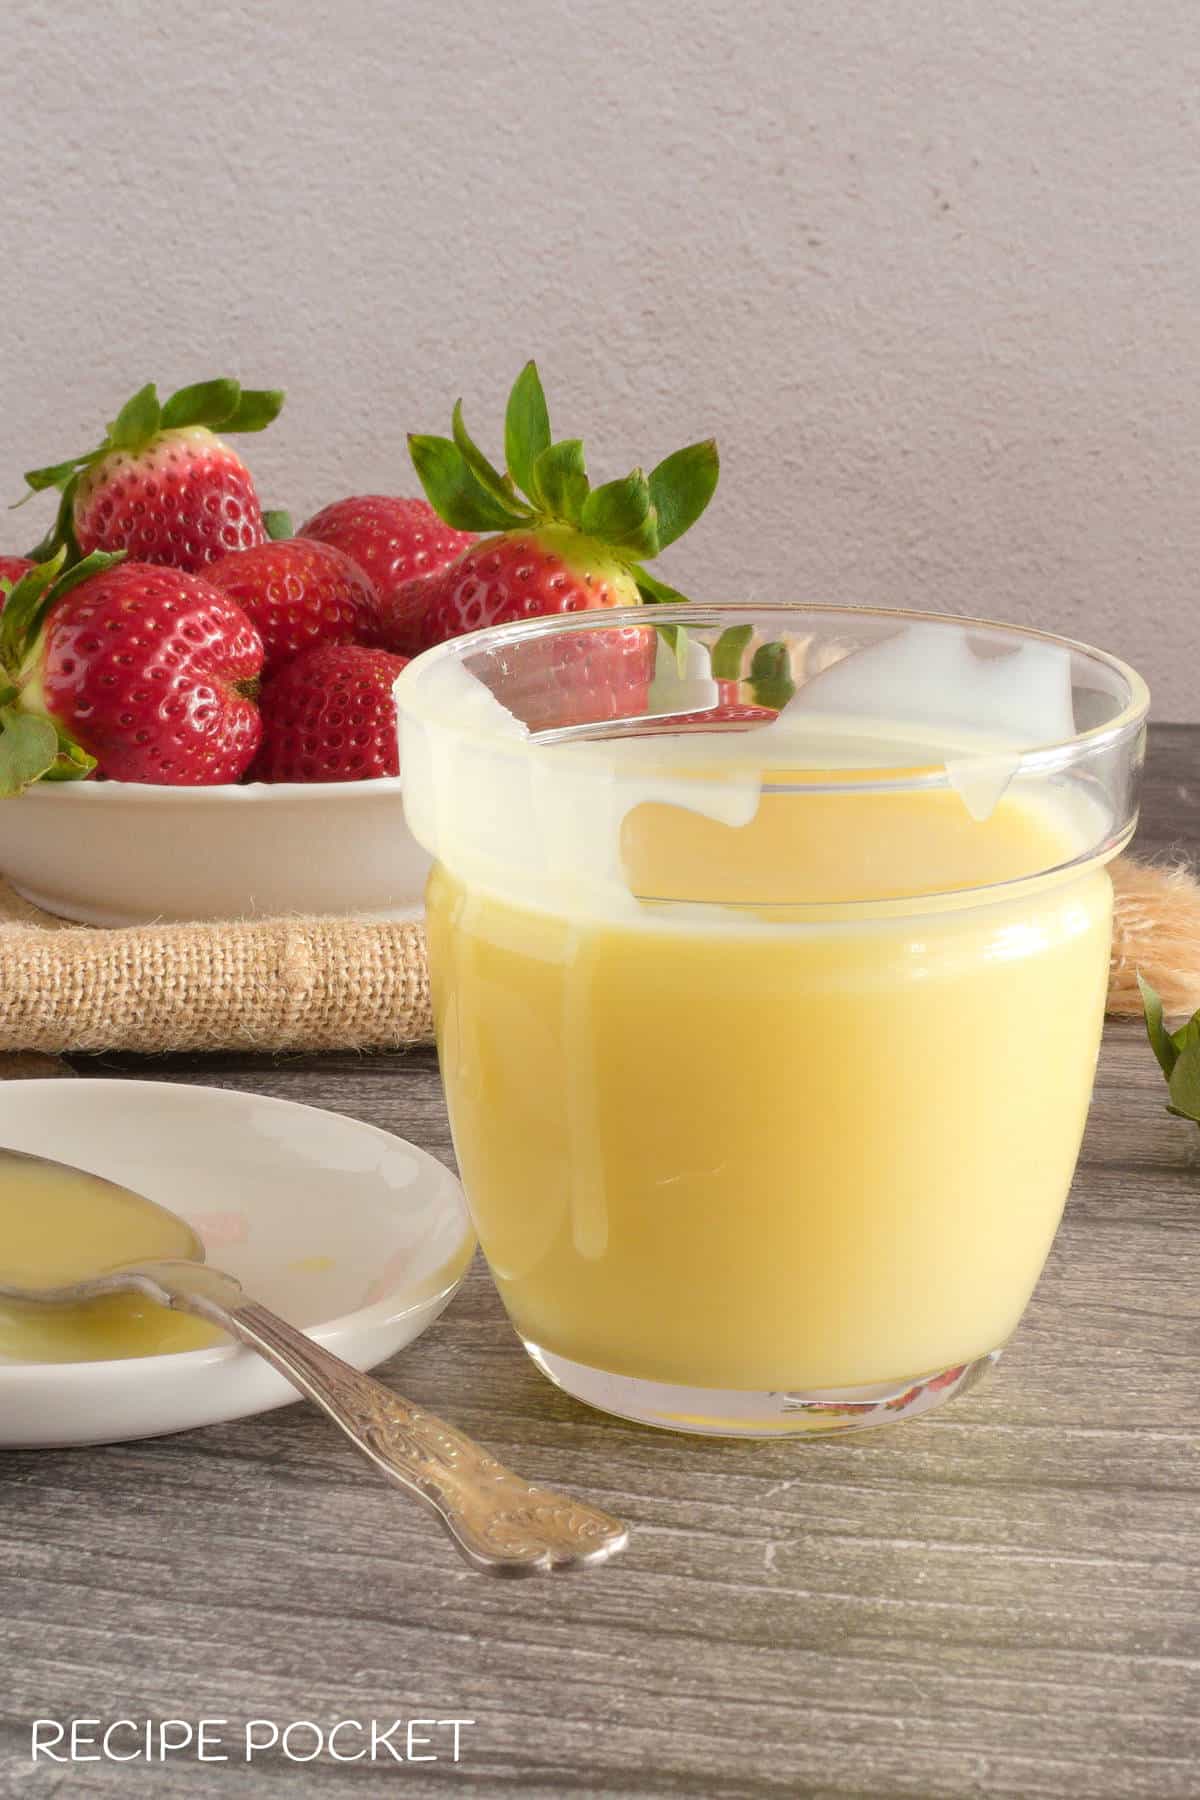 Homemade white chocolate sauce in a glass container.